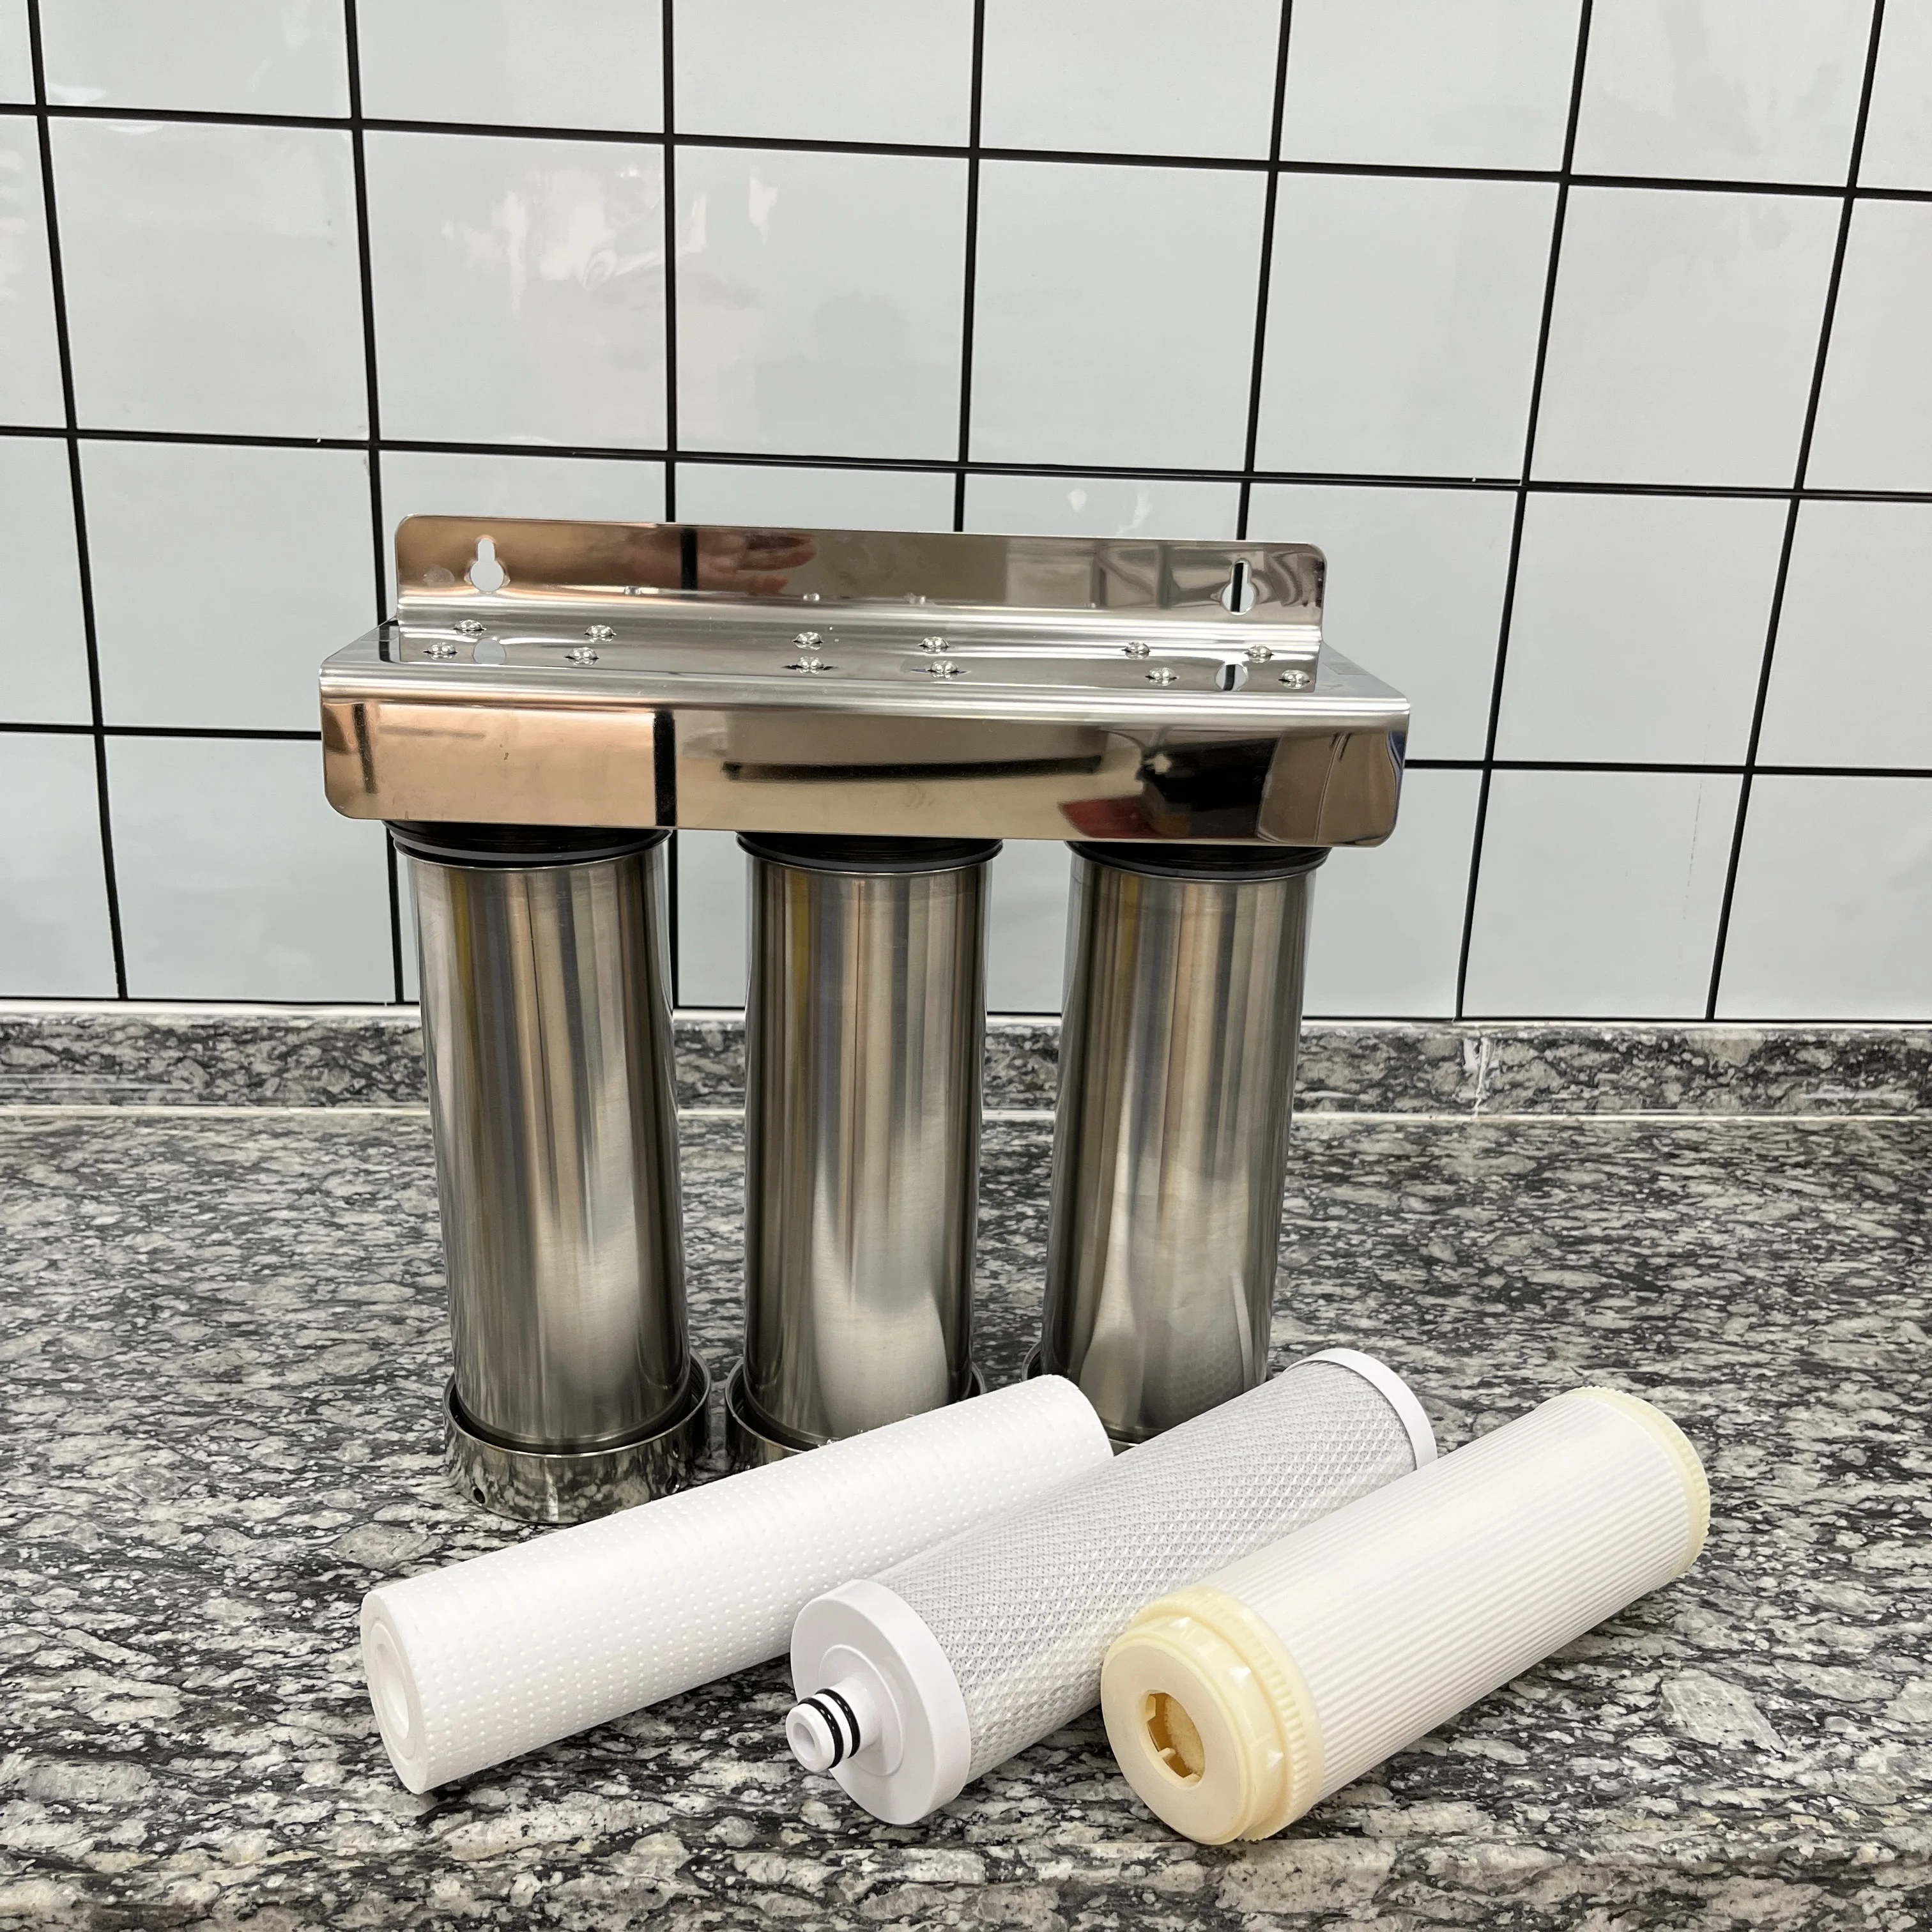 

large flow pre filter stainless steel filter housing under sink 3 stage water filter system uf water purifier for home drinking